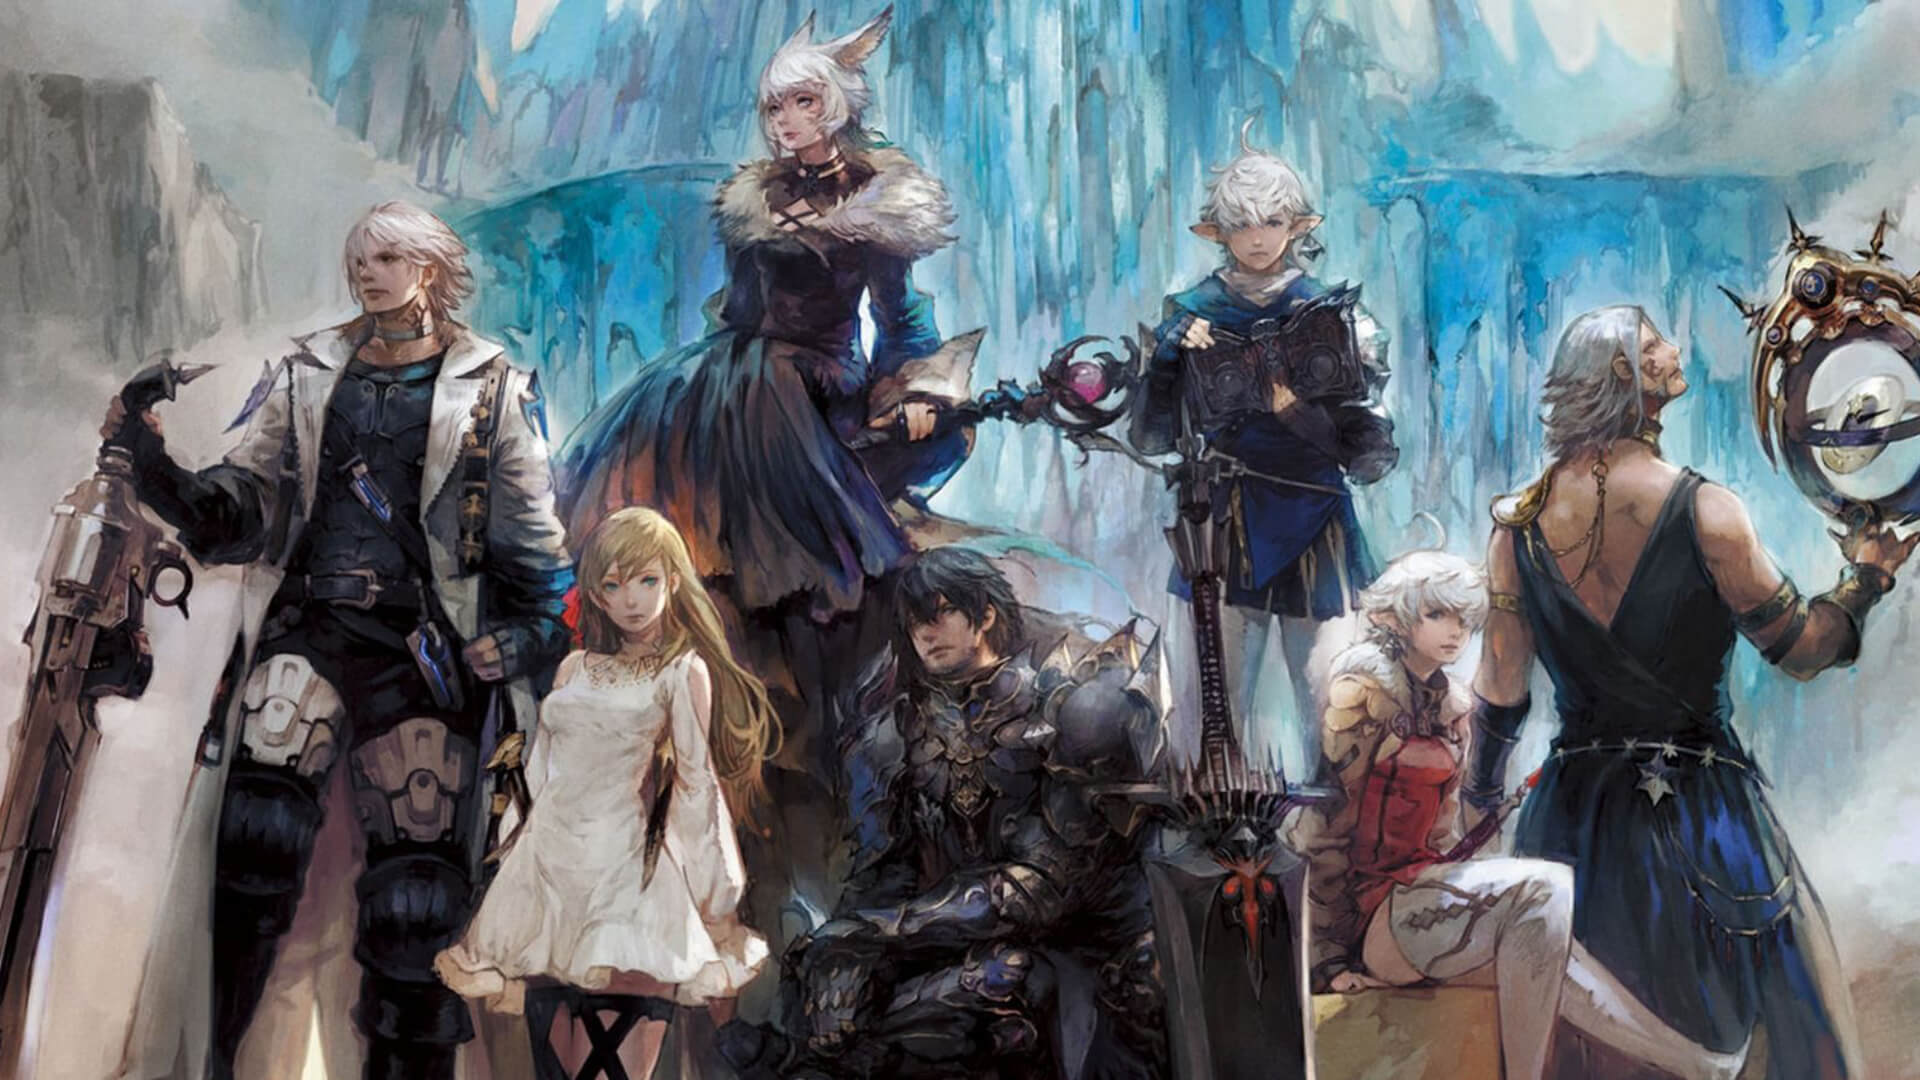 Final Fantasy 14, an online game many players have turned to during the pandemic.